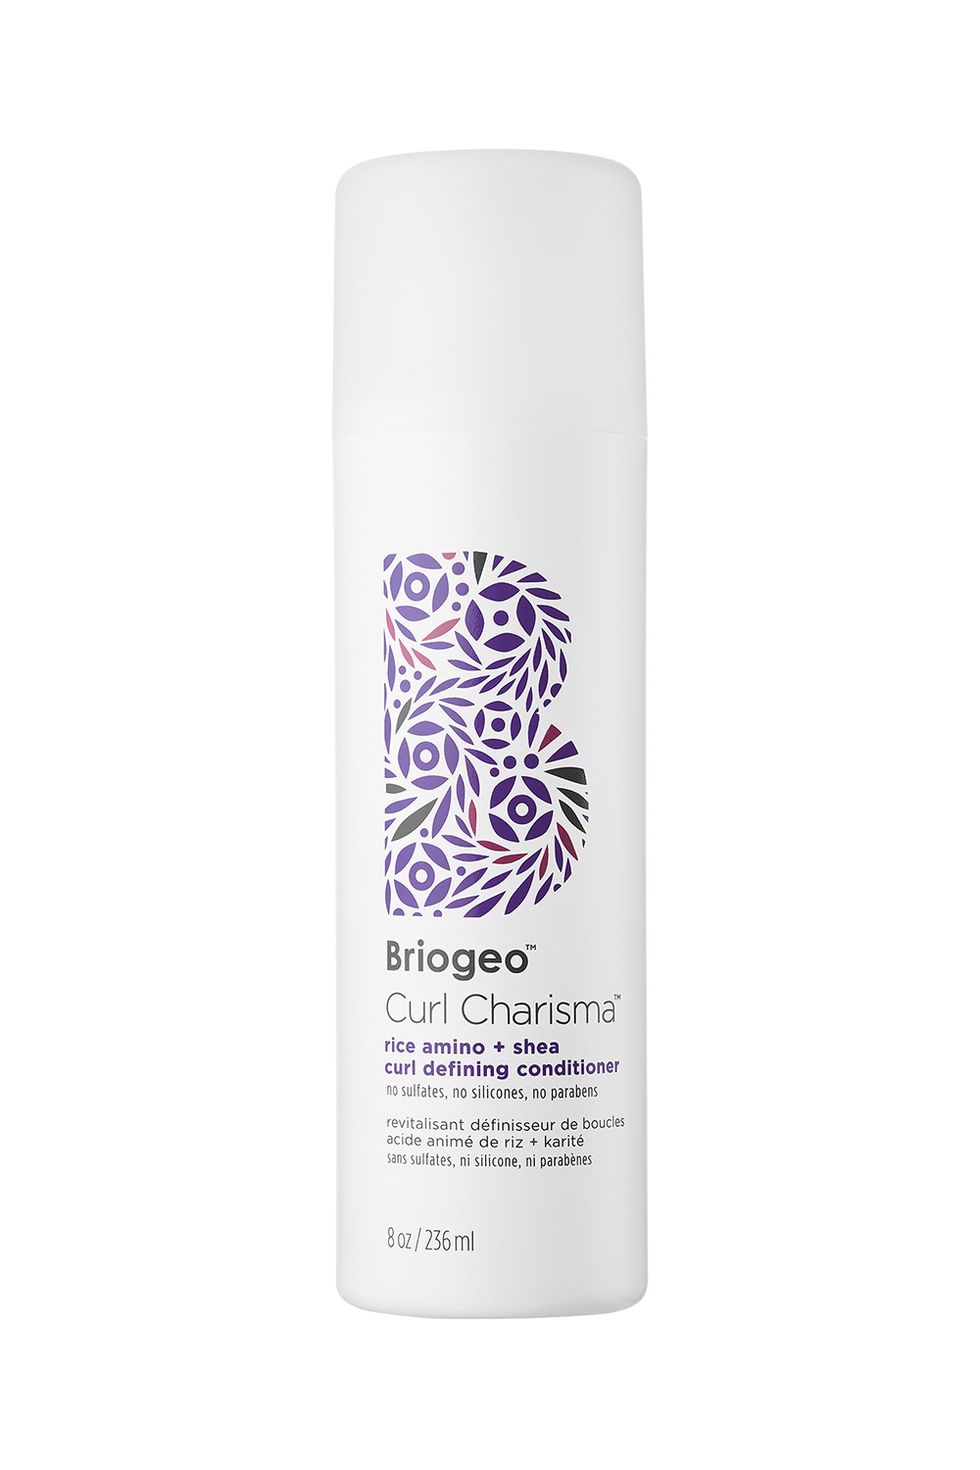 <p>A godsend for curly hair types, Briogeo's Curl Charisma shampoo uses a blend of natural oils and vegetable extracts to seal the hair cuticle, taming frizz and softening strands to the touch. </p>

<p><strong data-redactor-tag="strong" data-verified="redactor">Briogeo Curl Charisma Rice Amino and Shea Moisture Shampoo, $24; <a href="http://www.sephora.com/curl-charisma-rice-amino-shea-moisture-shampoo-P402074?skuId=1784644&amp;icid2=you%20may%20also%20like:p402074" target="_blank" data-tracking-id="recirc-text-link">sephora.com</a>.</strong></p>